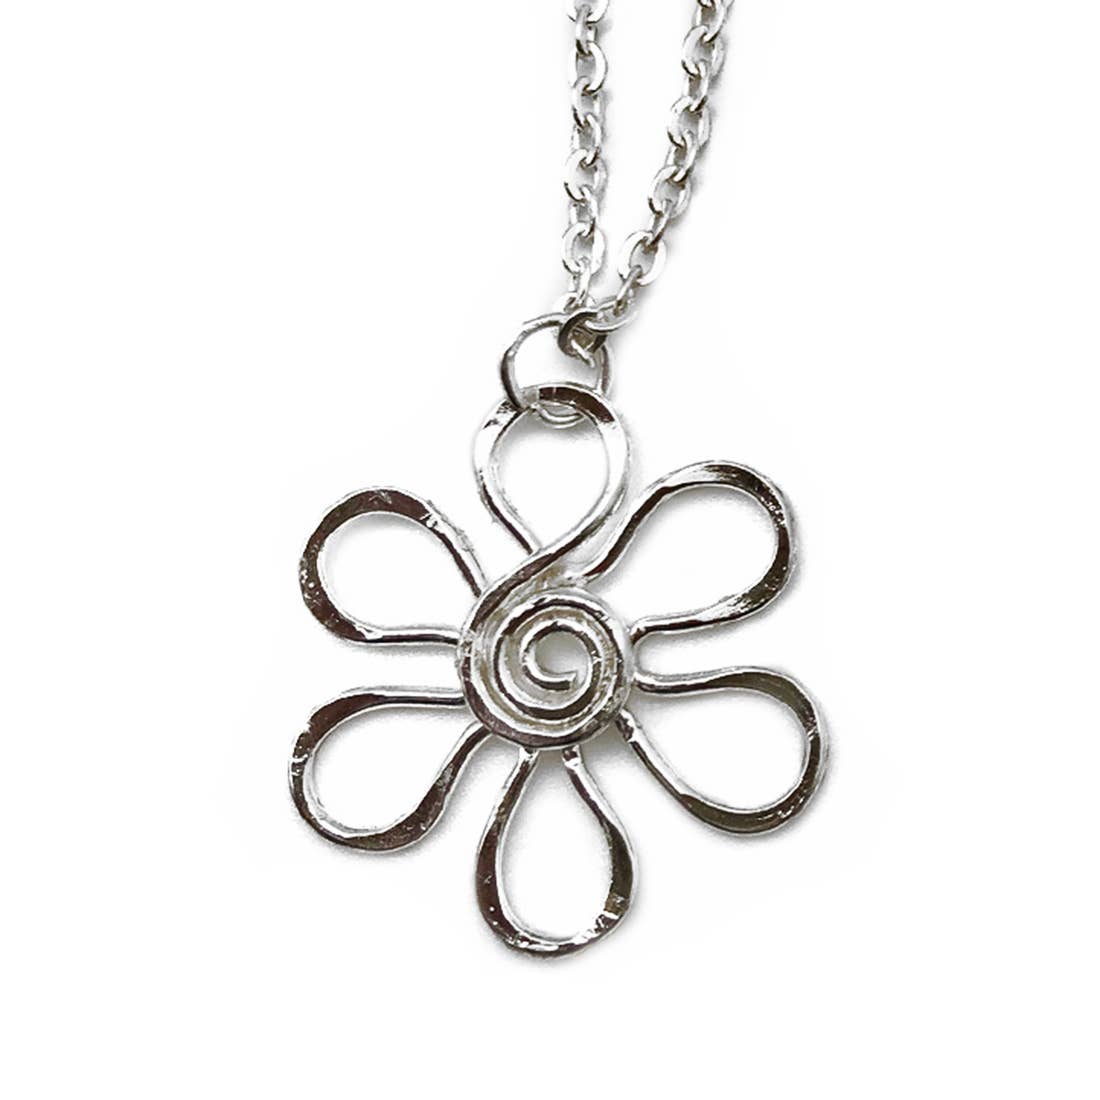 Silver Plated Necklace - Smaller Size Daisy